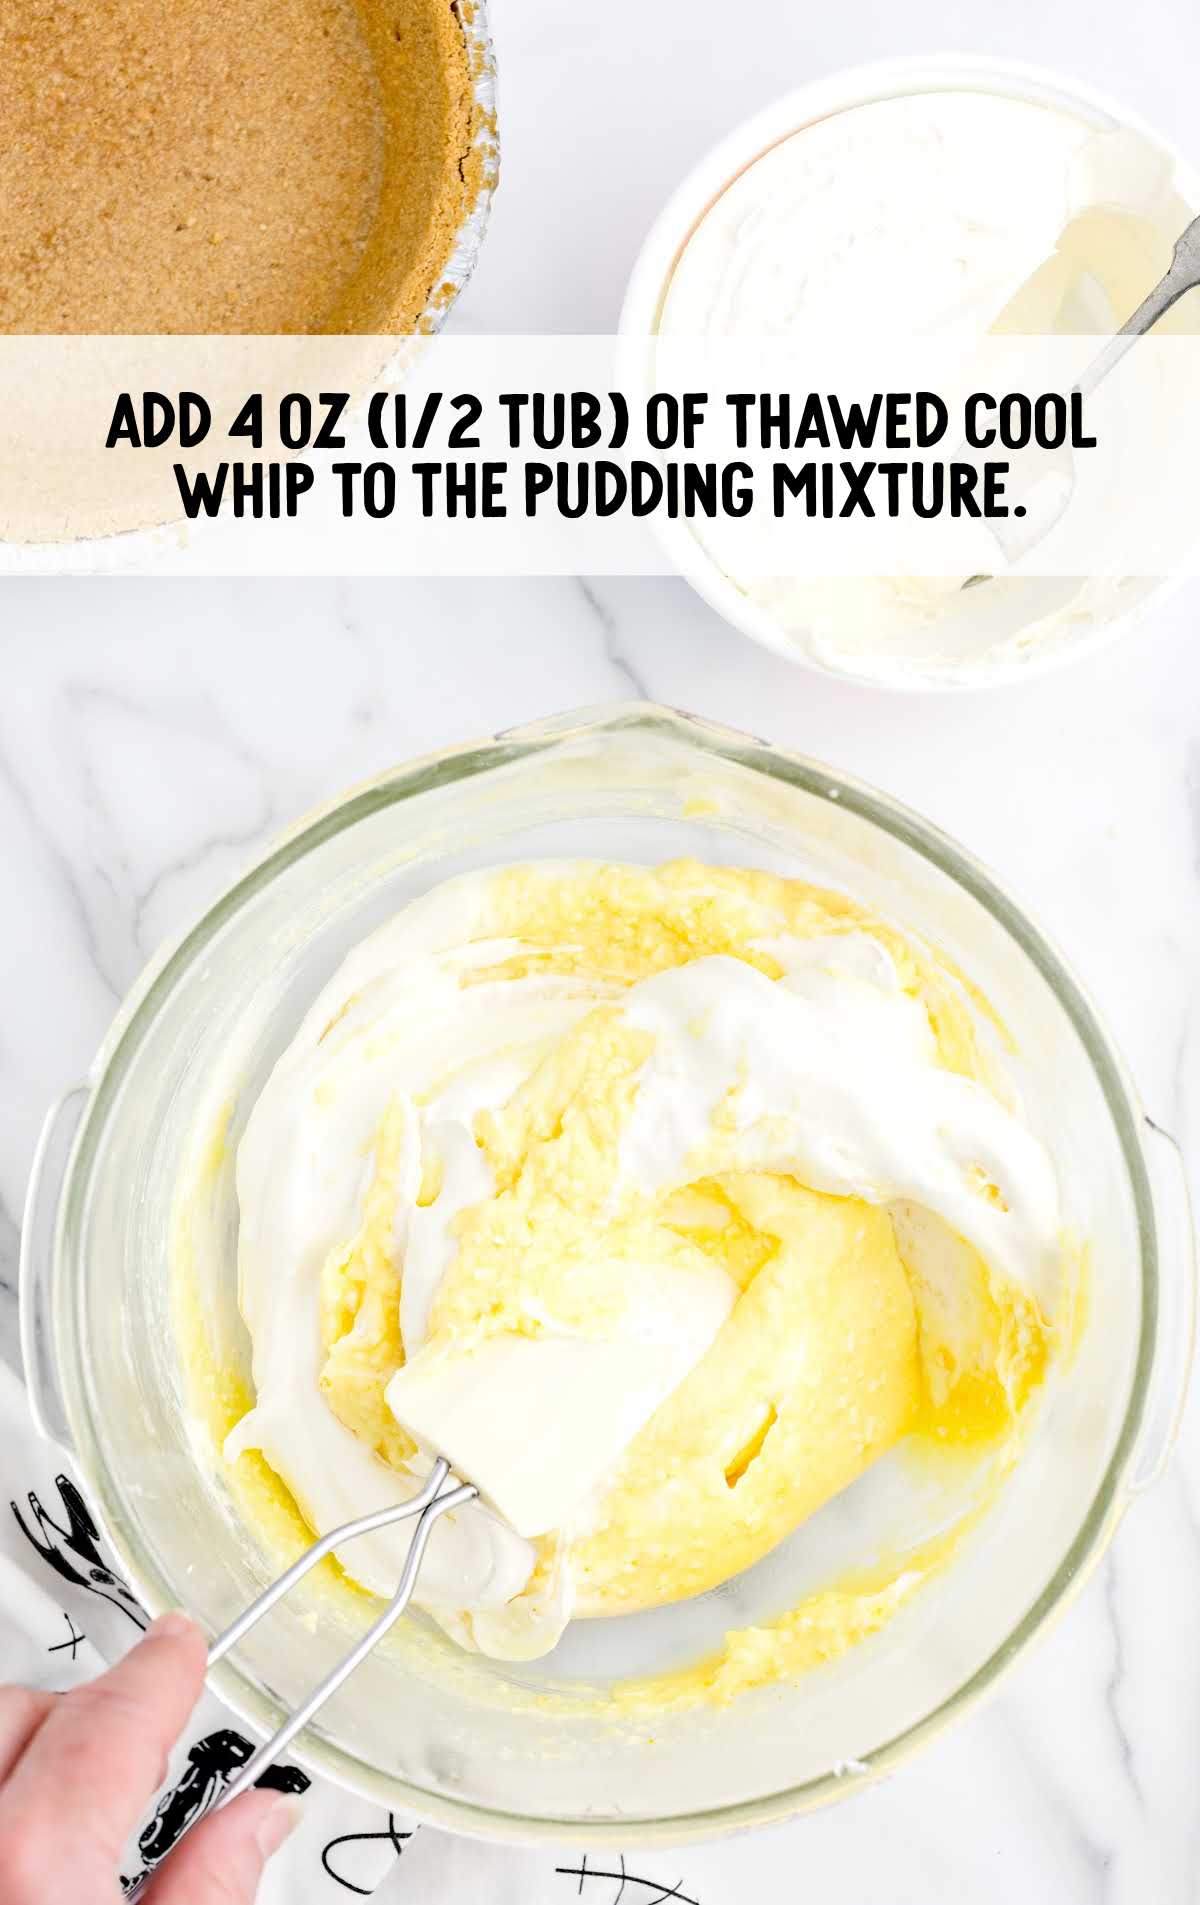 thawed cool whip added to the pudding mixture in a bowl